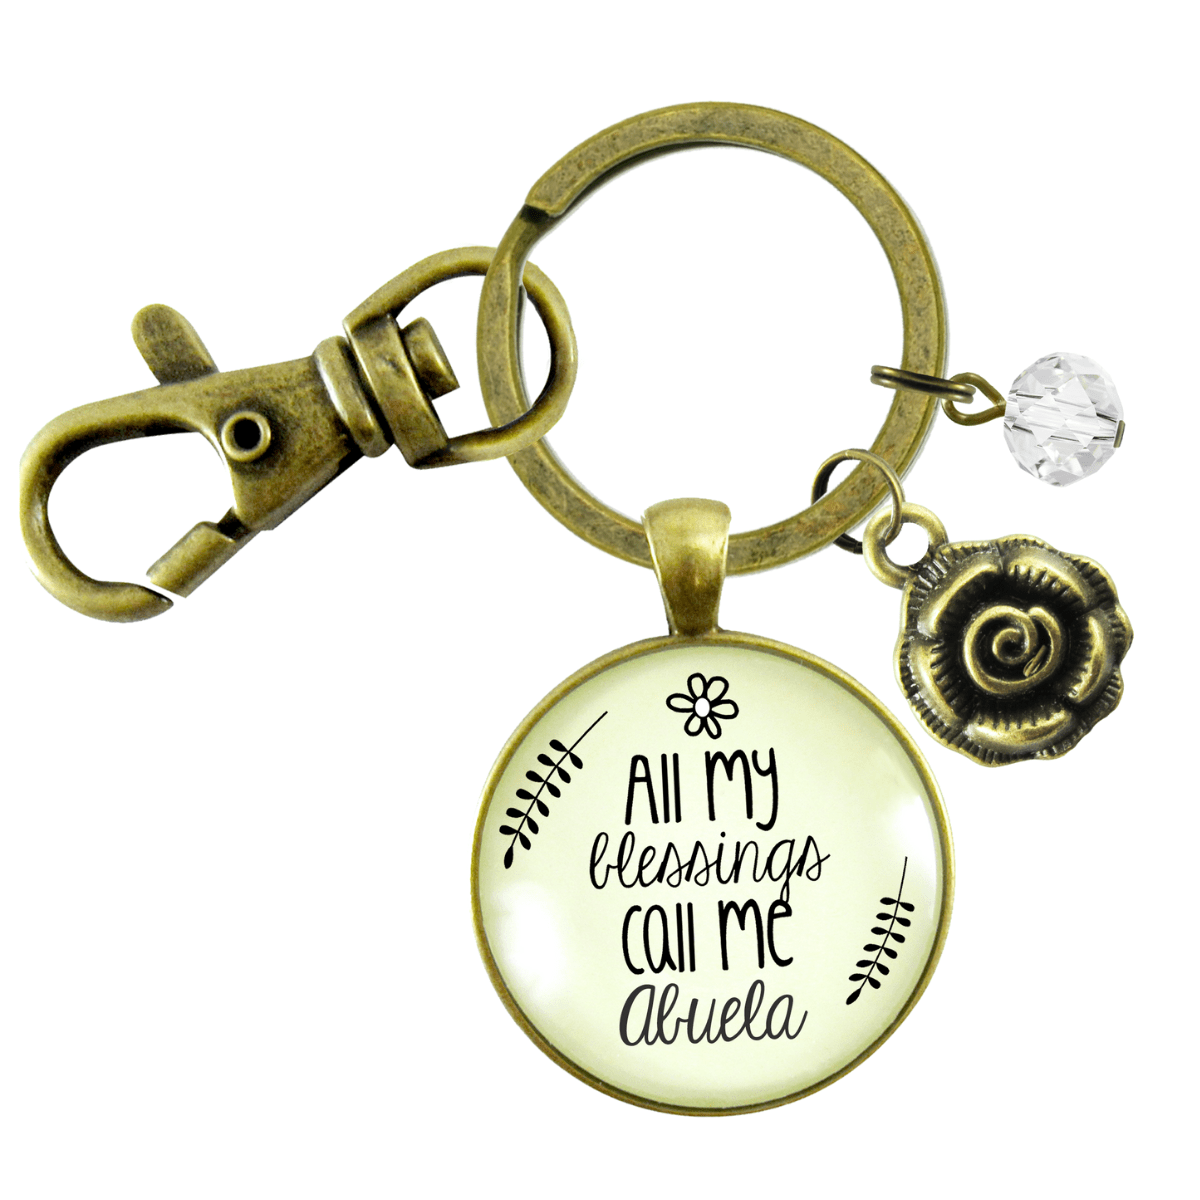 Abuela Keychain All My Blessings Call Me Abuela Spanish Grandmother Gift Jewelry - Gutsy Goodness